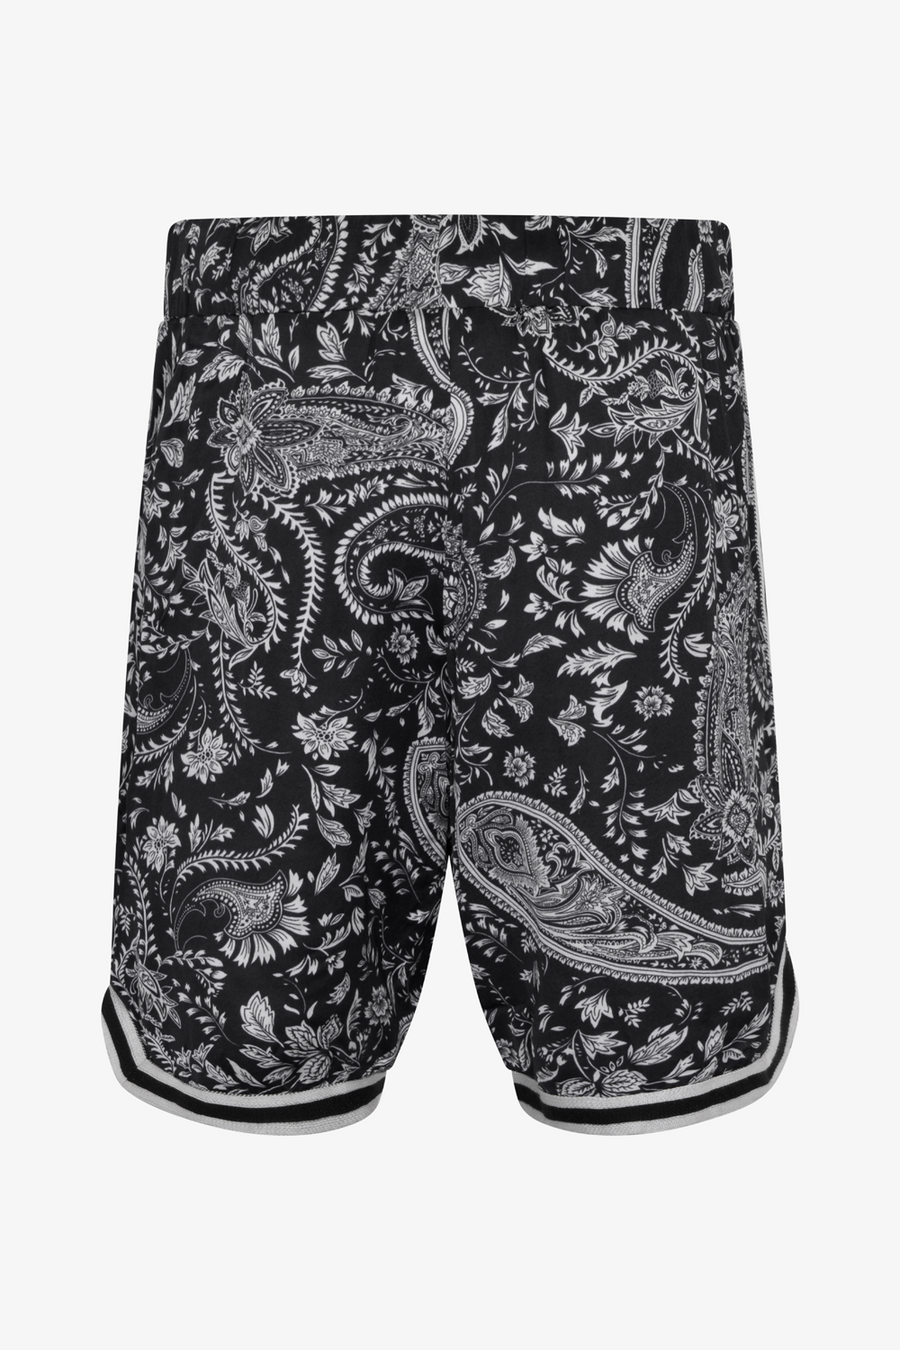 Buy the RH45 Tropic Basketball Short in Black at Intro. Spend £50 for free UK delivery. Official stockists. We ship worldwide.